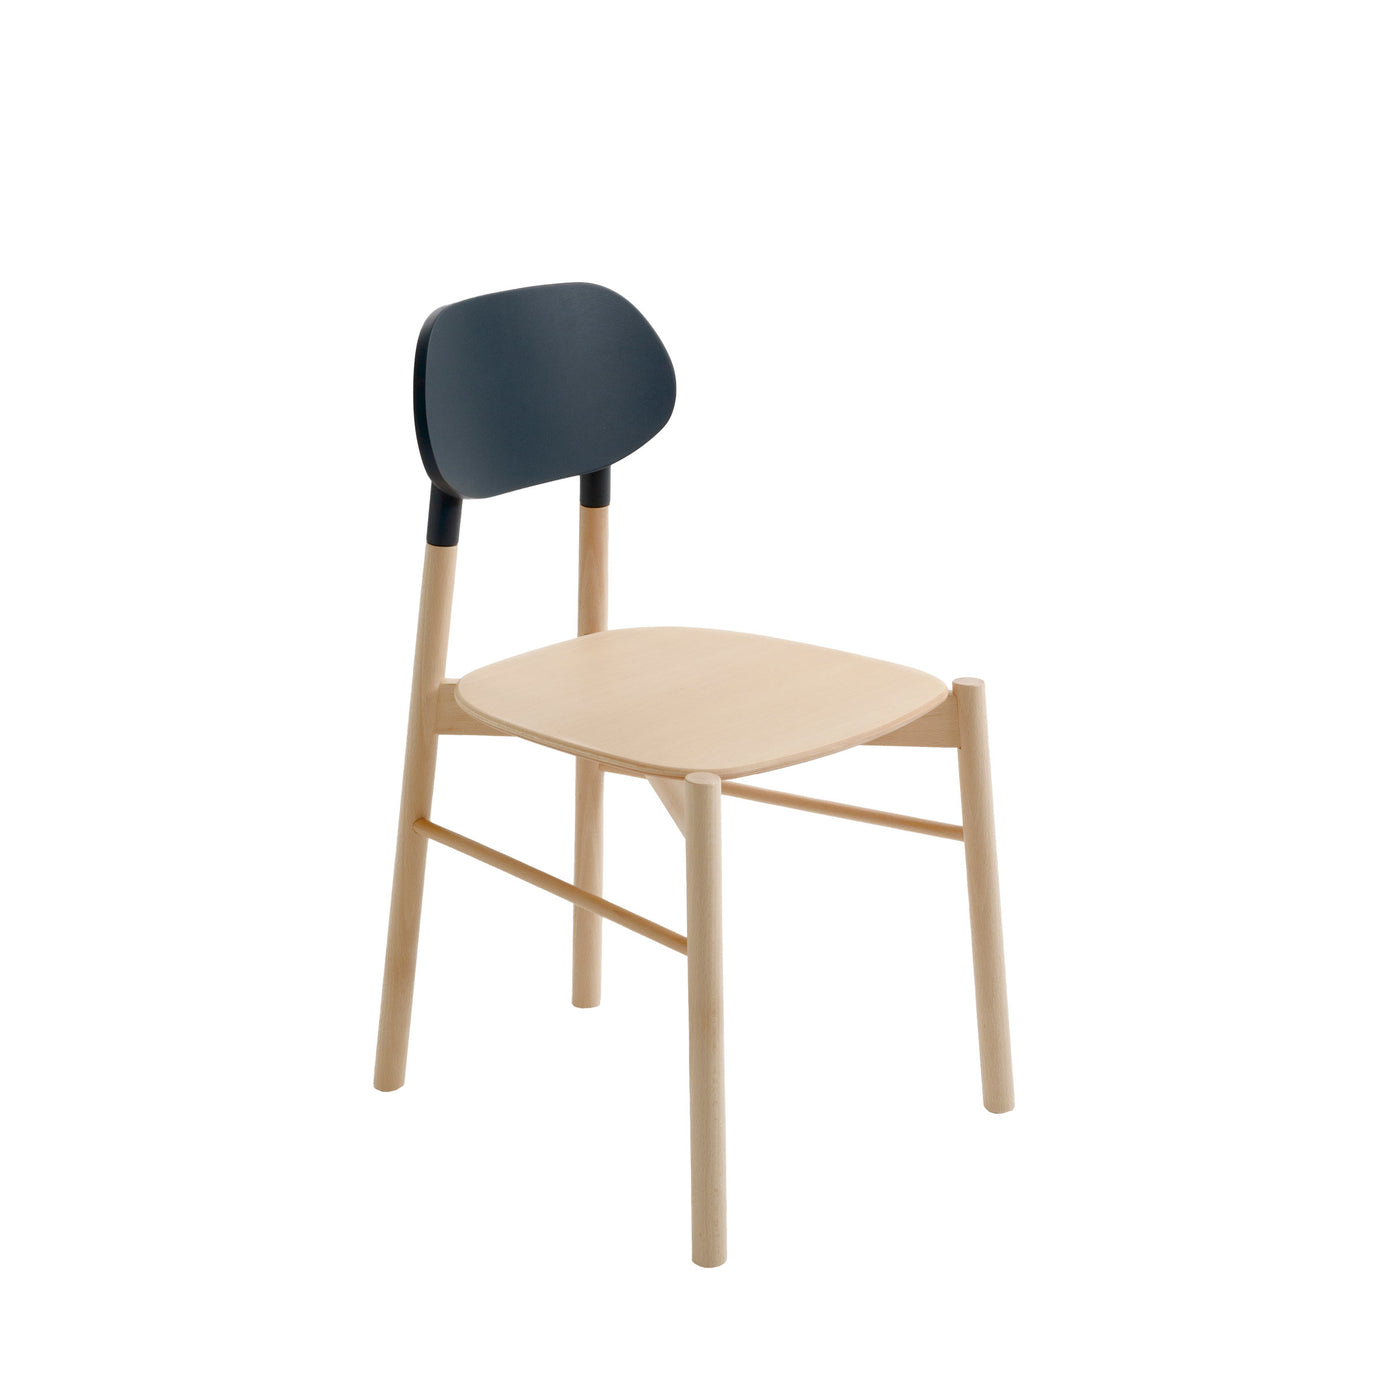 Wood Dining Chair BOKKEN by Bellavista + Piccini for Colé Italia 02